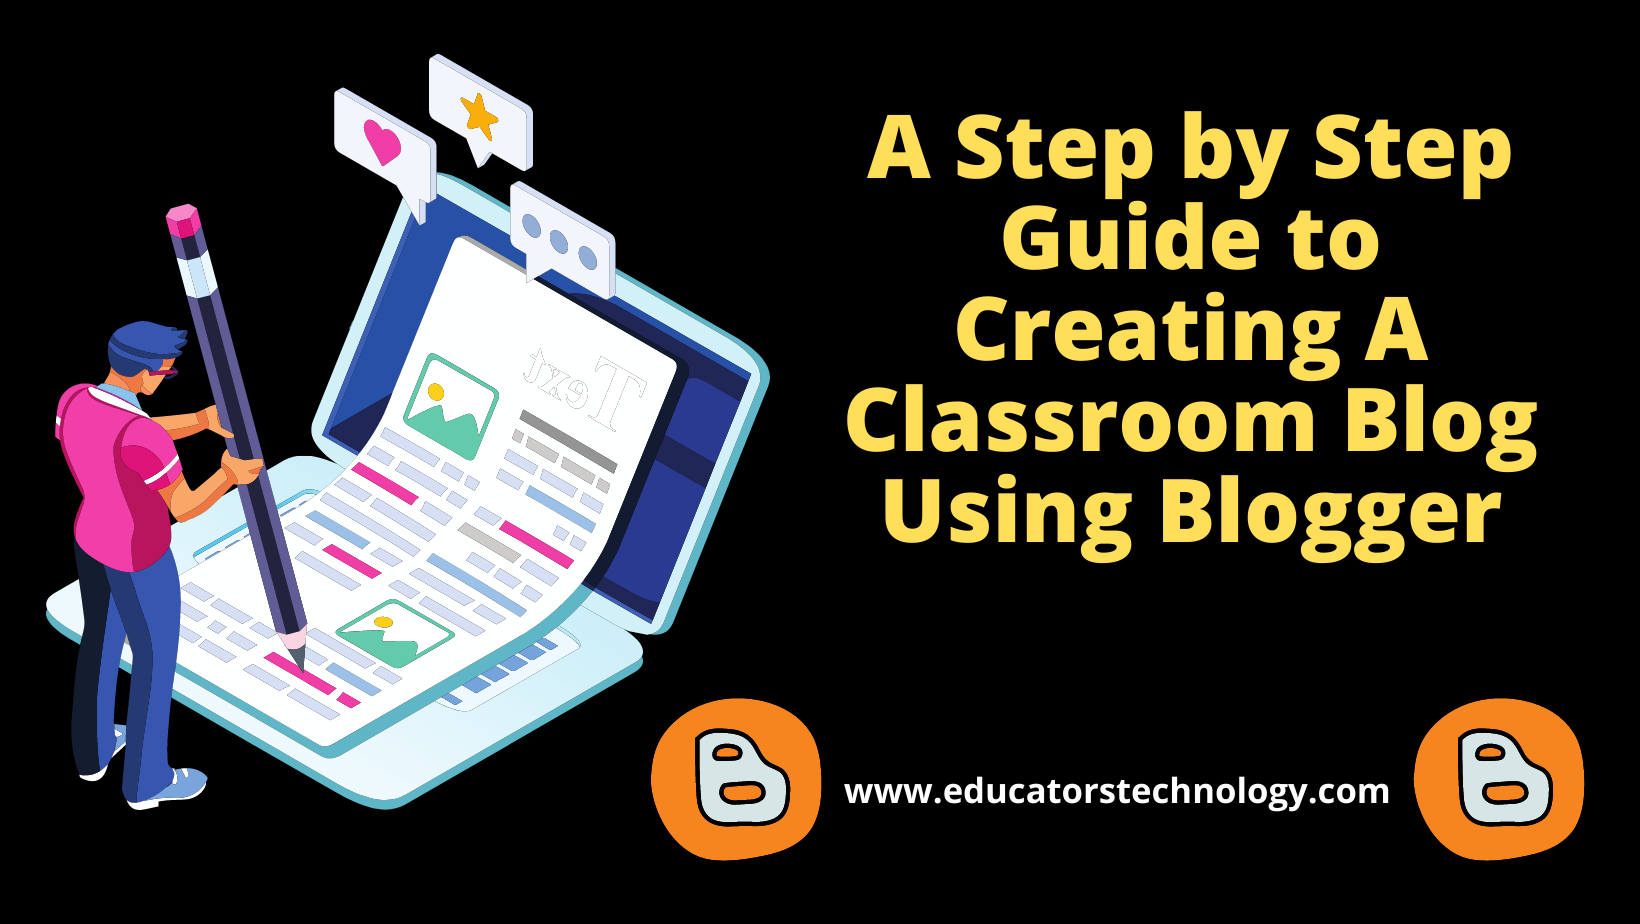 Here is How to Create A Classroom Blog Using Blogger